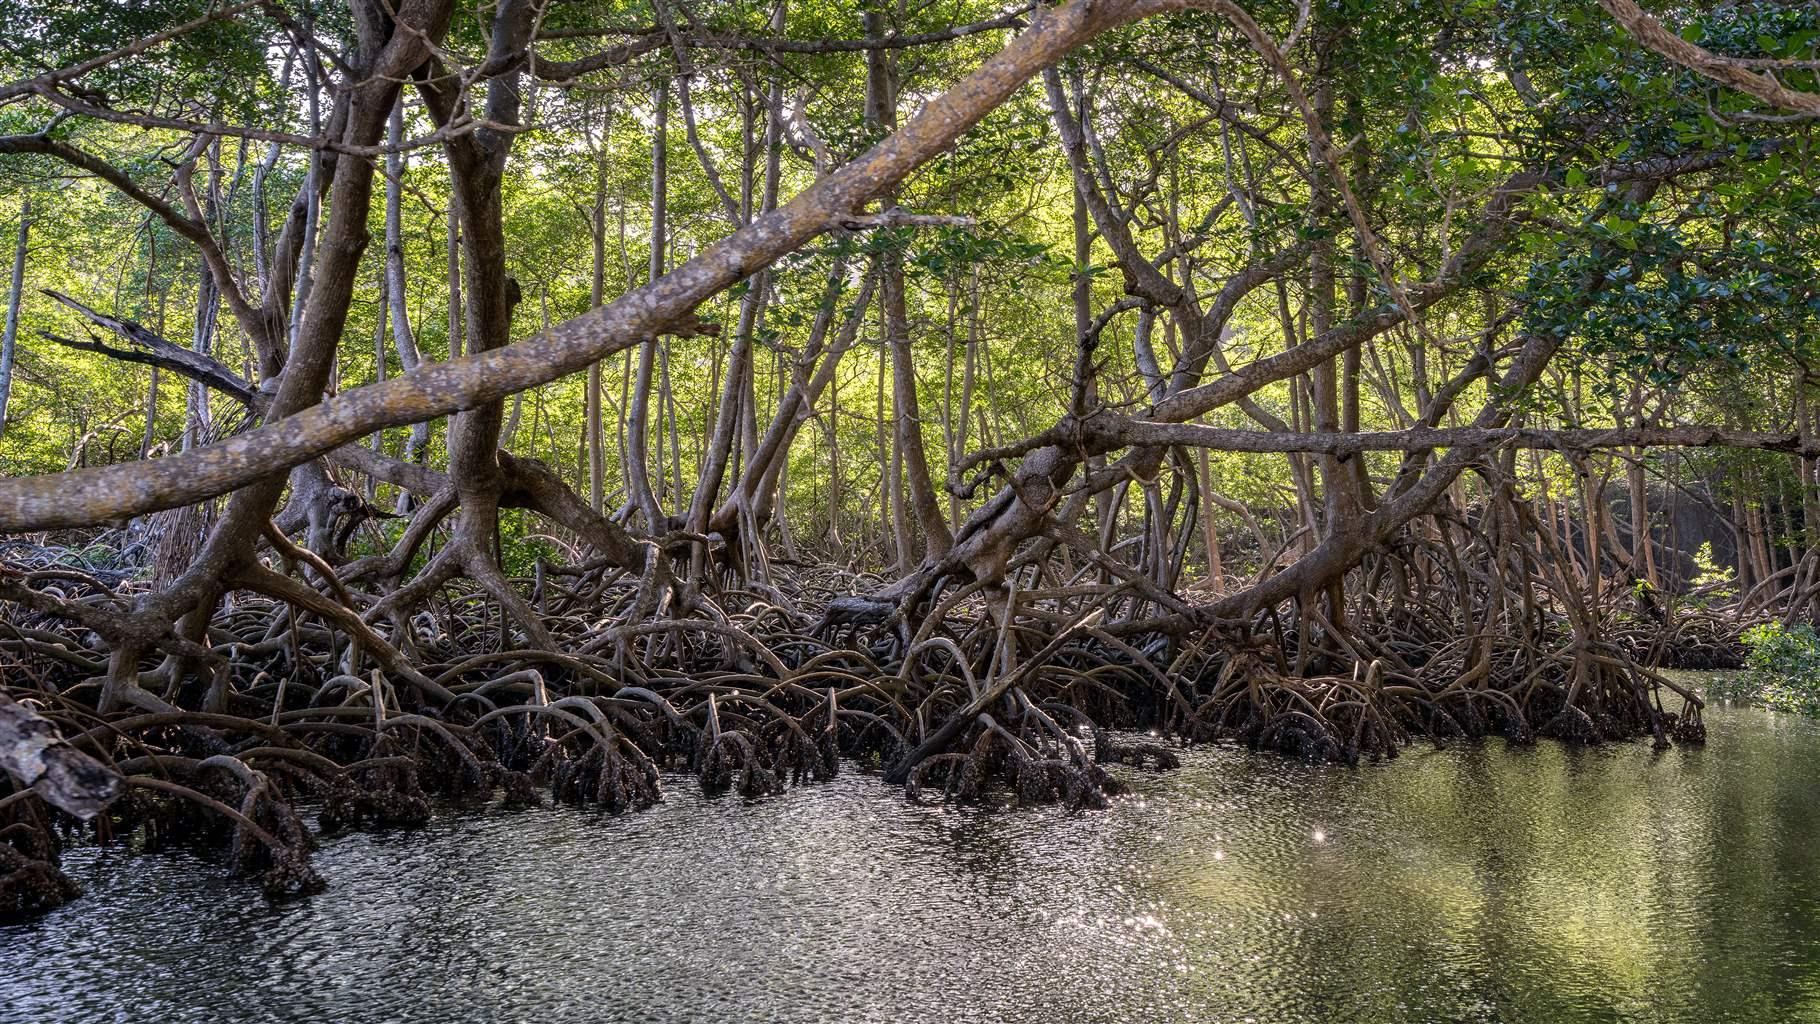 6 Reasons for Restoring and Protecting Mangroves | The Pew Charitable Trusts